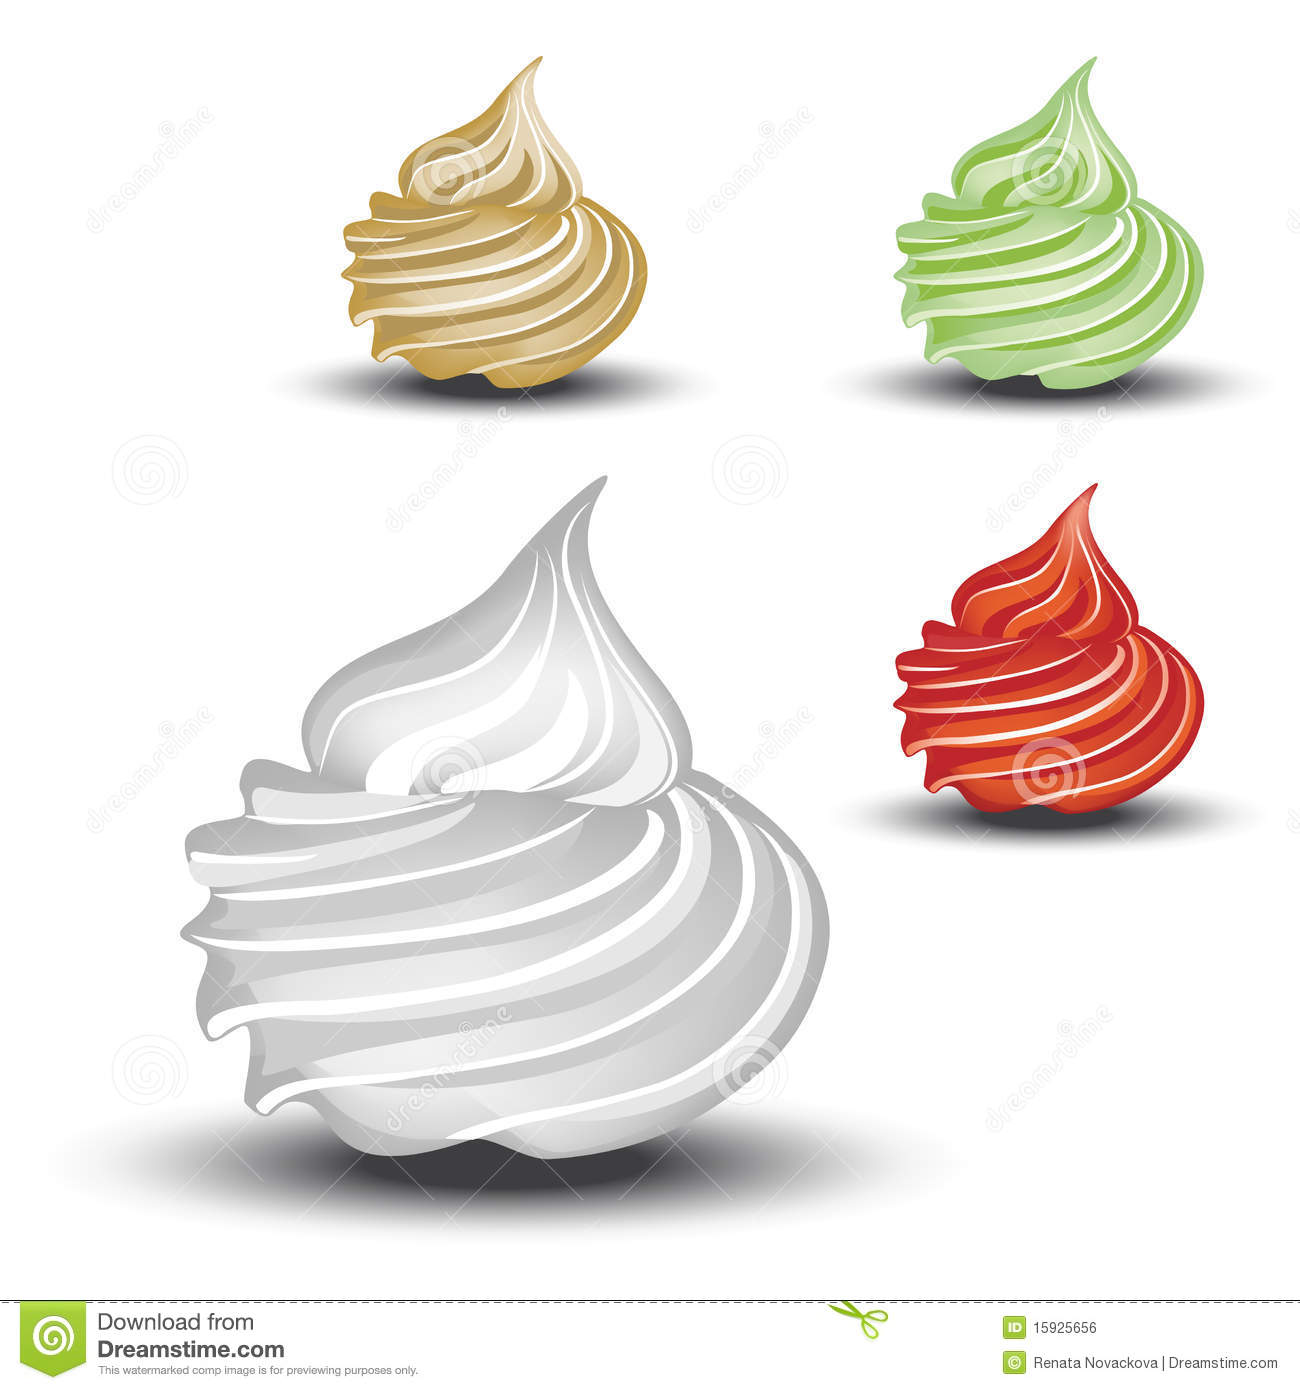 Vector Whipped Cream Royalty Free Stock Image   Image  15925656